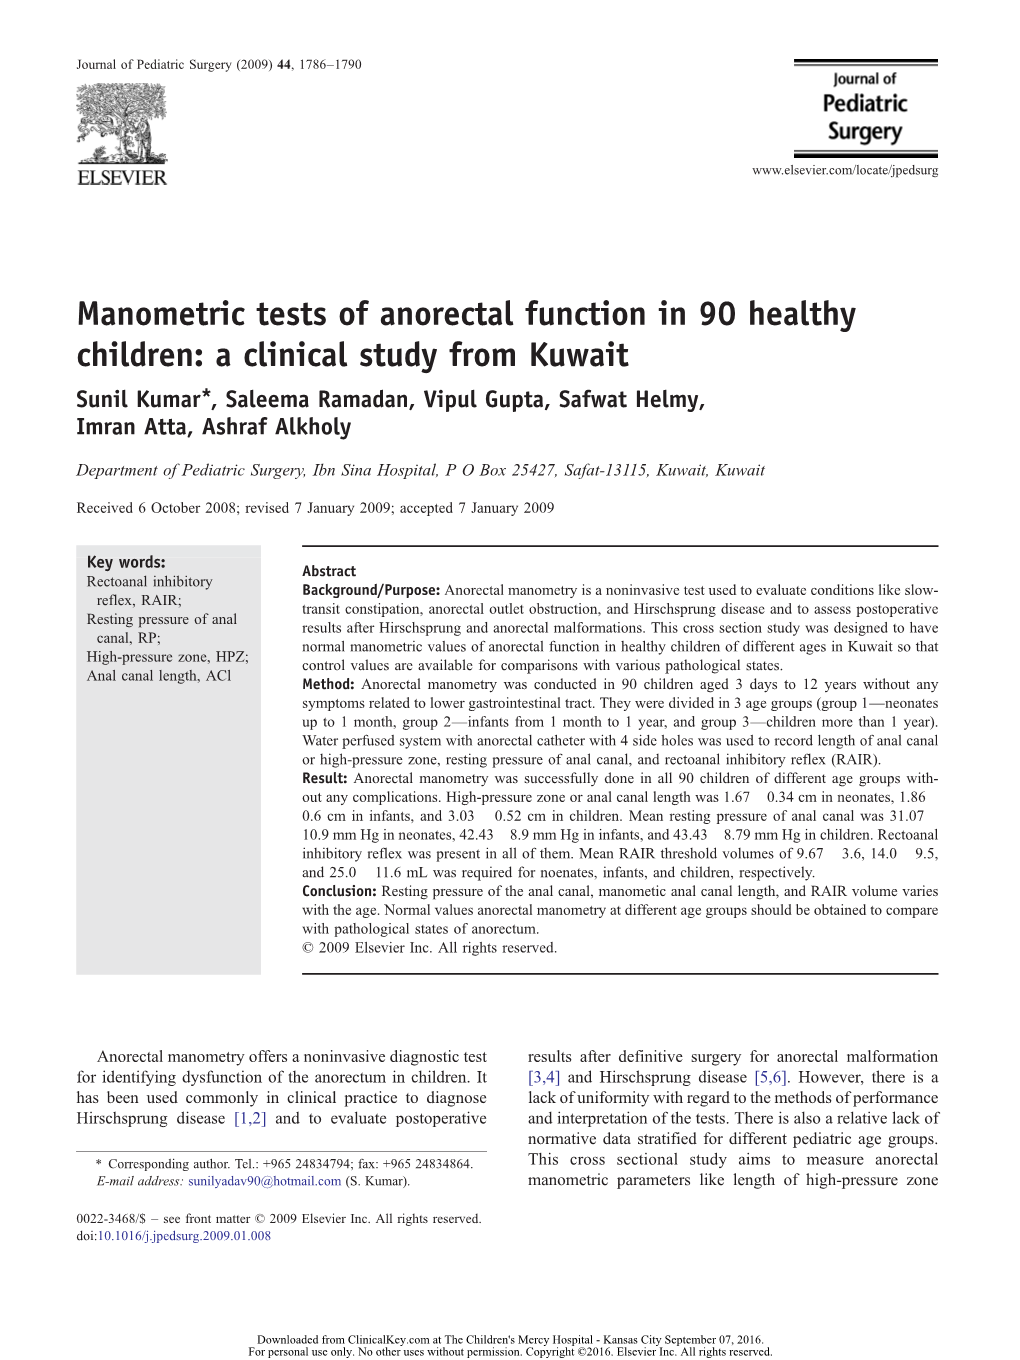 Manometric Tests of Anorectal Function in 90 Healthy Children